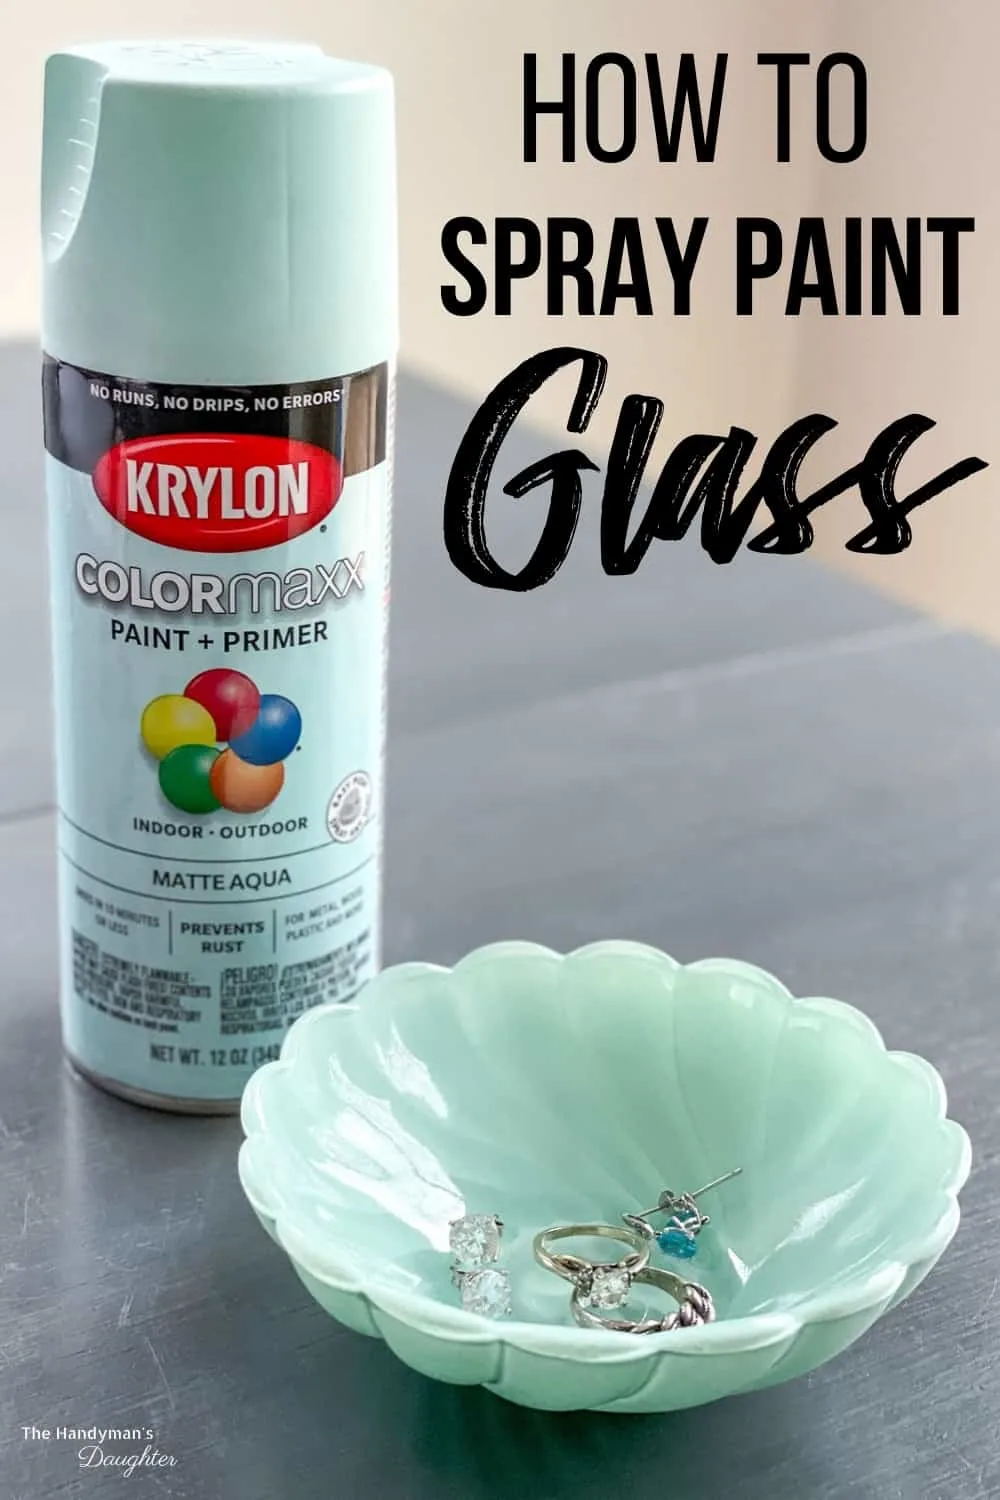 https://www.thehandymansdaughter.com/wp-content/uploads/2021/01/How-to-Spray-Paint-Glass-Pin-1.jpg.webp